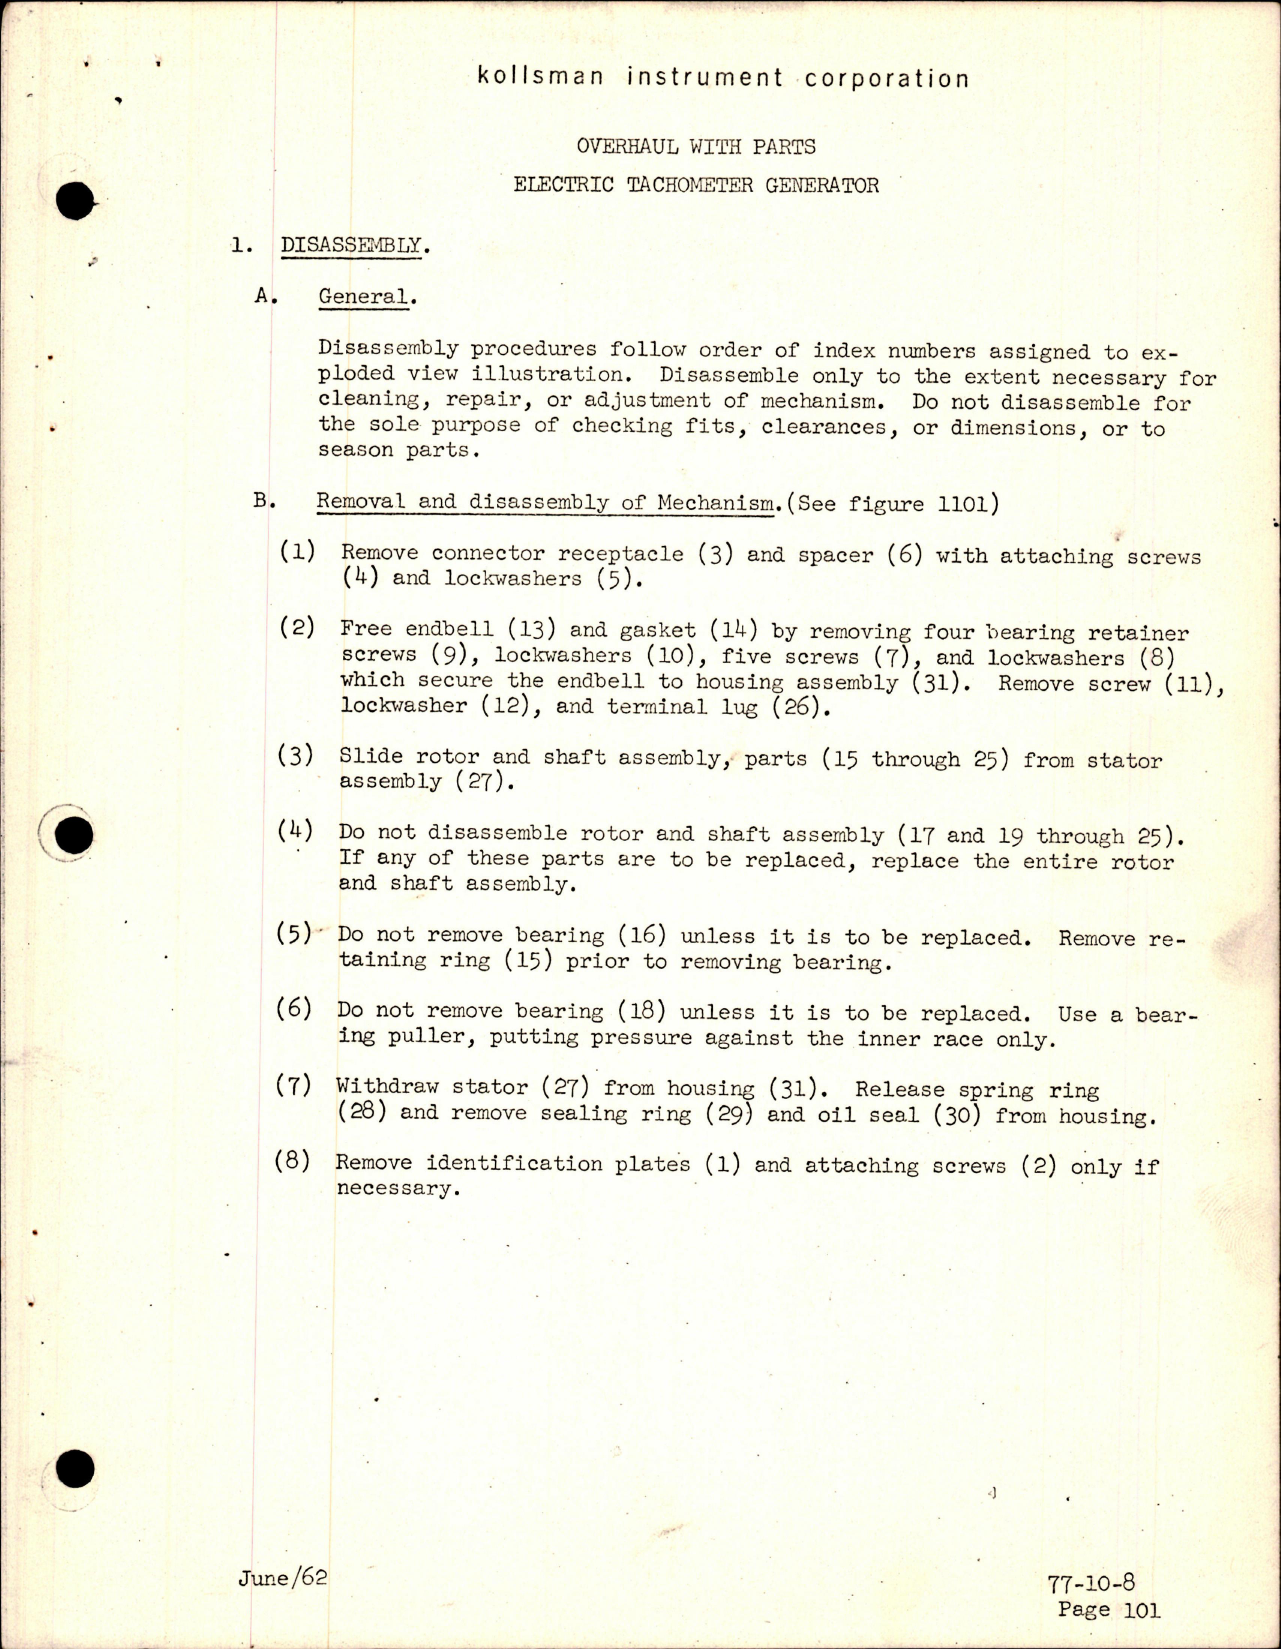 Sample page 7 from AirCorps Library document: Overhaul Instructions with Parts for Electric Tachometer Generator - Parts A28071 11 302 and C28071 11 302